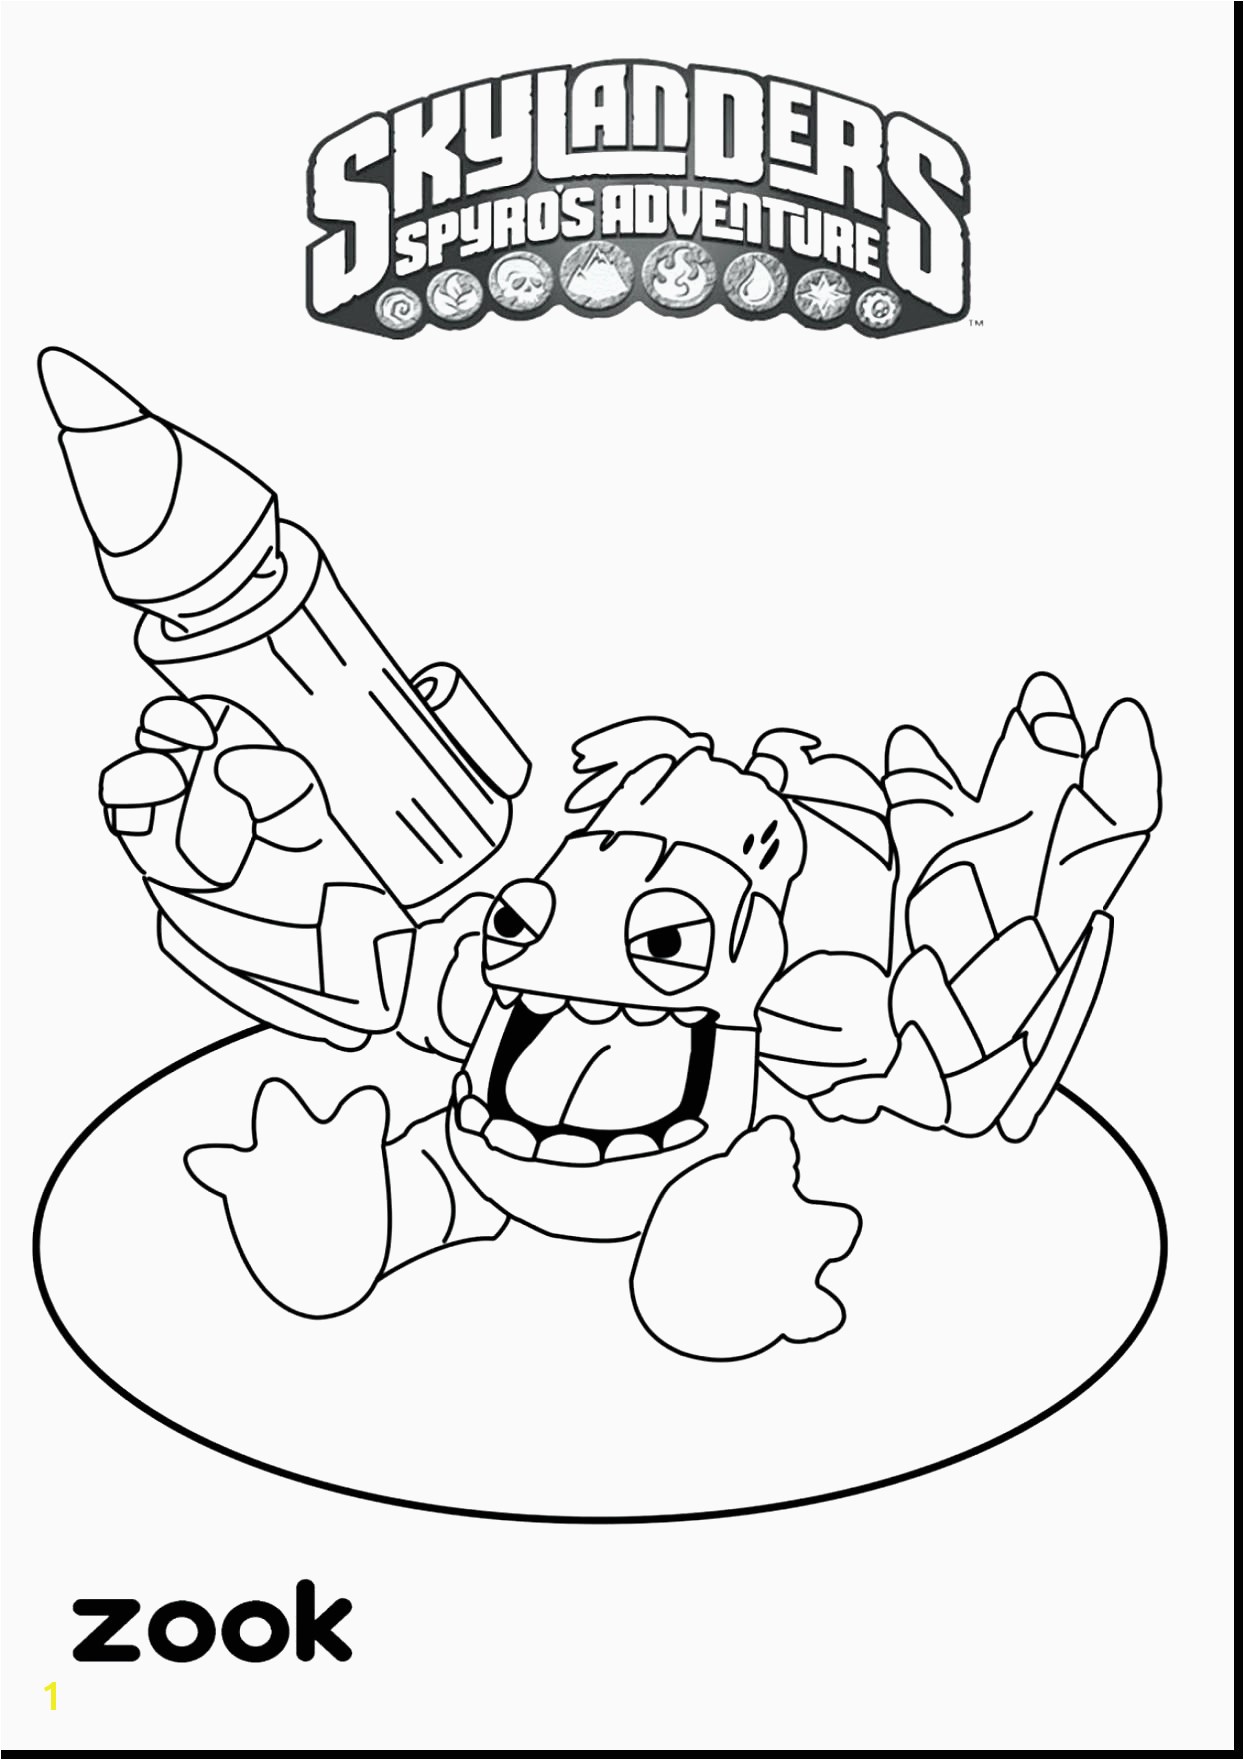 Zoo Animal Coloring Pages Awesome Animal Coloring Sheets Fresh I Pinimg originals 9f 2f 0d